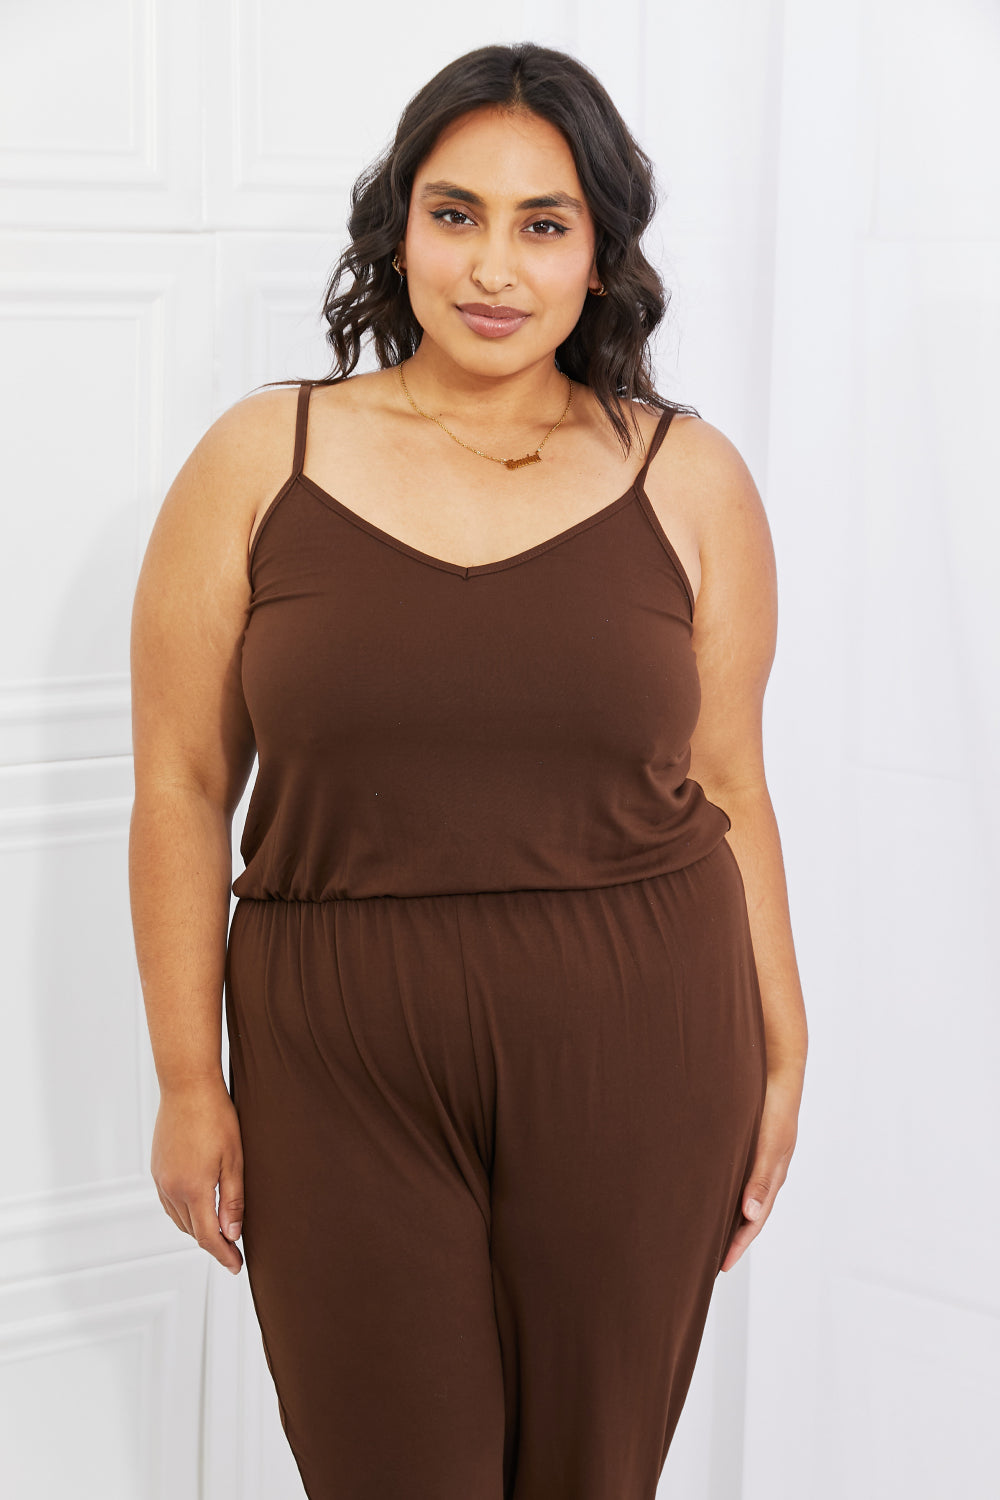 Capella Comfy Casual Full Size Solid Elastic Waistband Jumpsuit in Chocolate- ONLINE ONLY 2-7 DAY SHIP